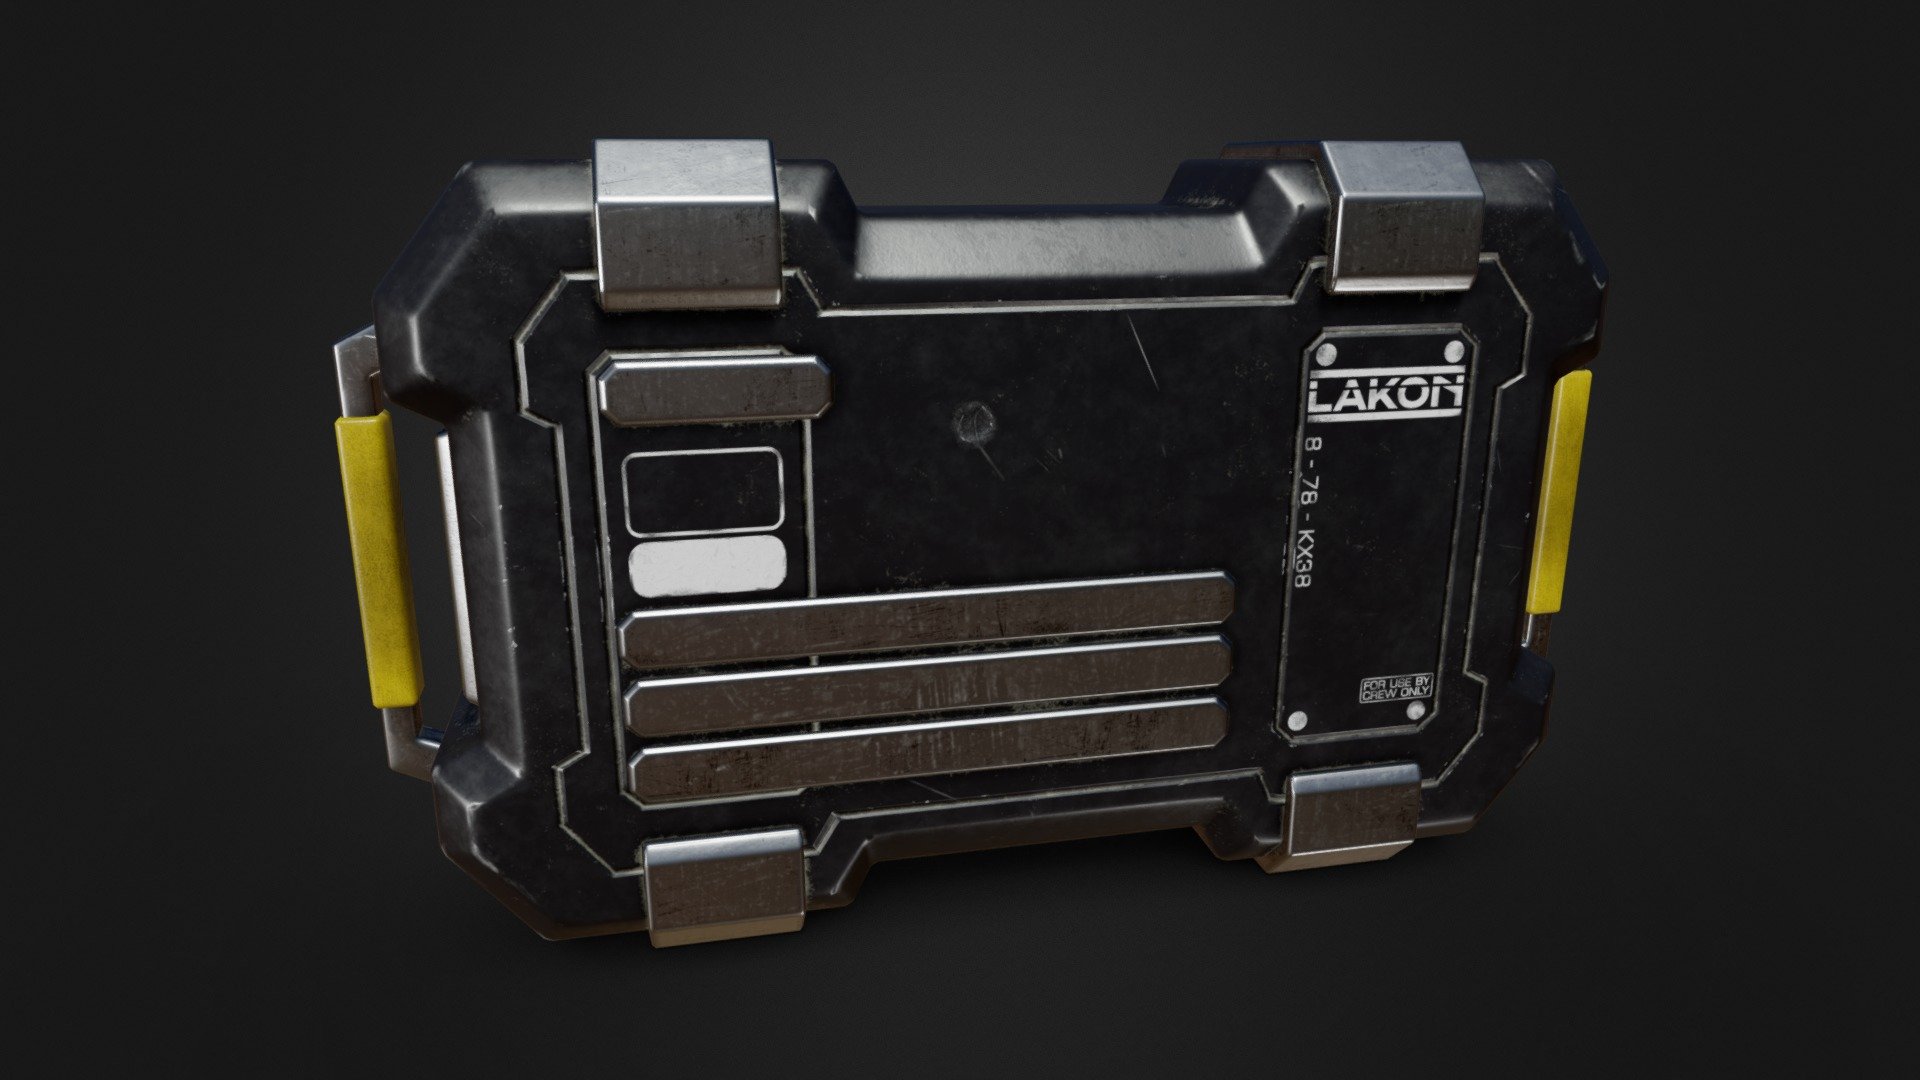 Carry your mission-ready gear in rugged style with this all-purpose utility box, modeled after the cockpit-mounted case found in the Alliance Chieftain spaceship from &ldquo;Elite: Dangerous.